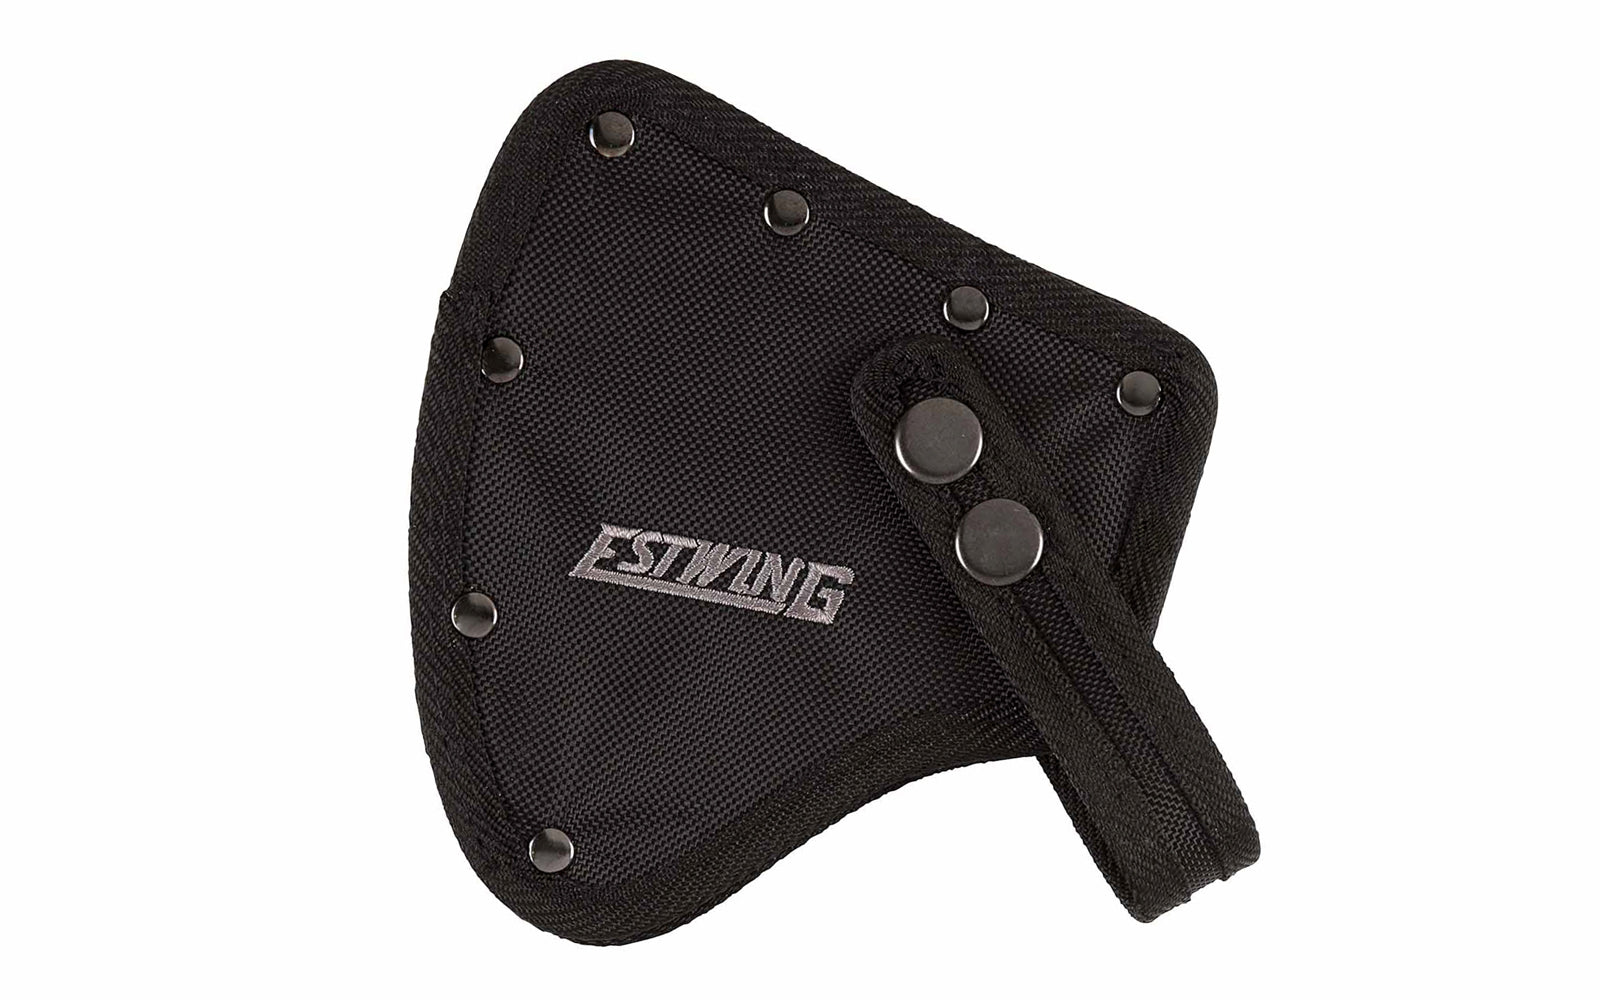 Estwing Model No. 15 Black Sheath. A replacement black nylon sheath for Estwing models No. E45A, E45ASE, & E44ASE axes. Made of durable ballistic nylon construction with reinforced stitching. A great sheath to protect your Estwing axes. Hatchet Sheath. Axe Sheath. 0034139200314. 